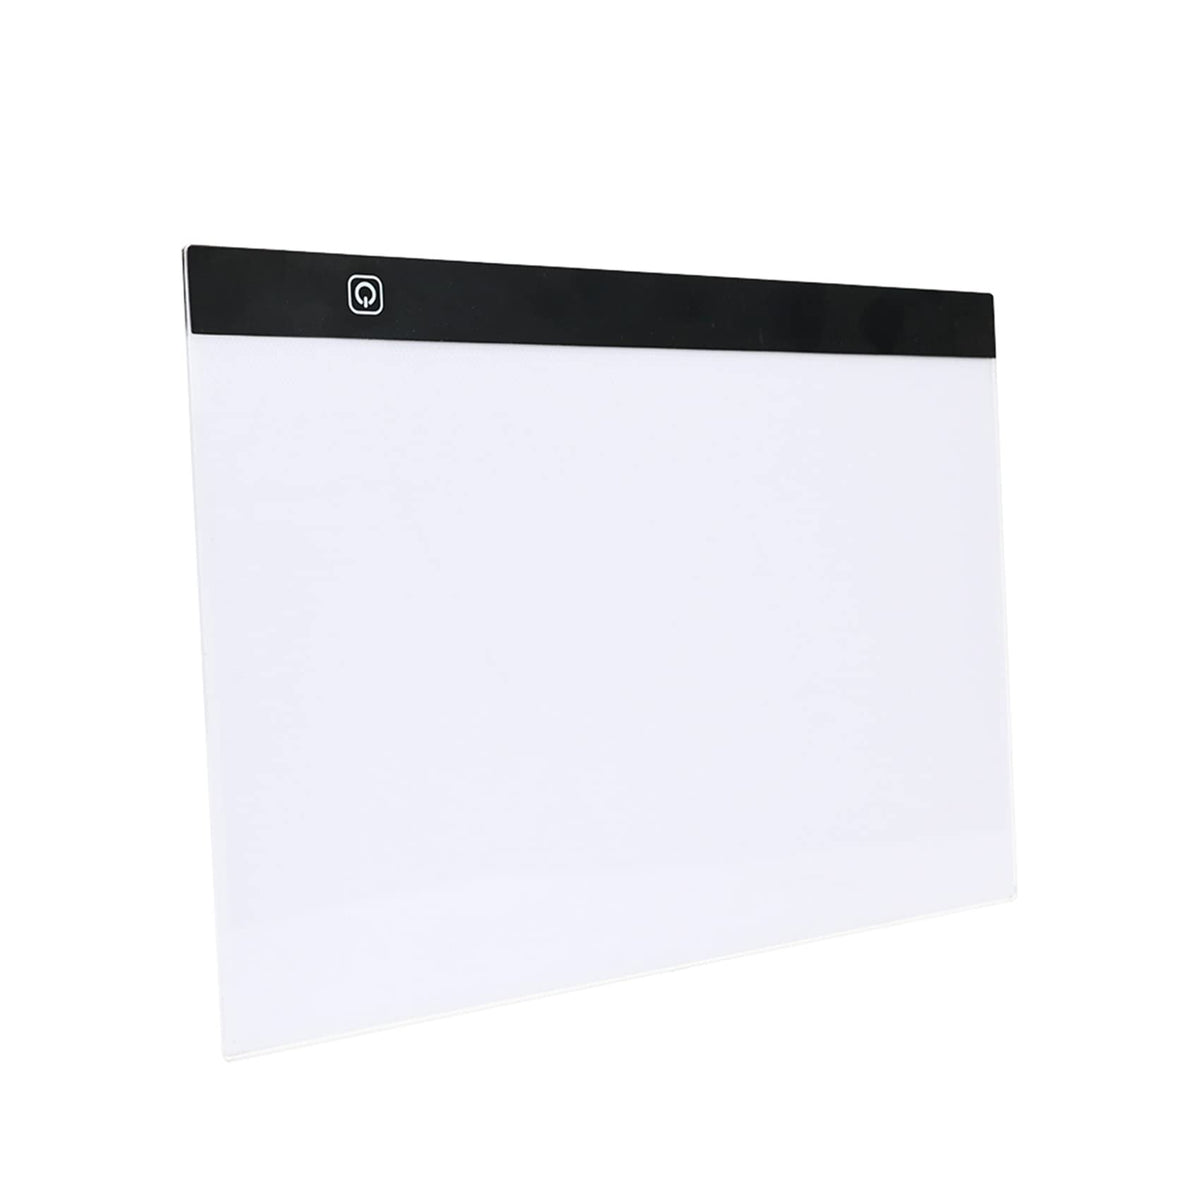 LED Light Box for Drawing and Tracing Portable Ultra-Thin Tracing Light Pad  by Illuminati USB Powered A4 Bright Trace Table